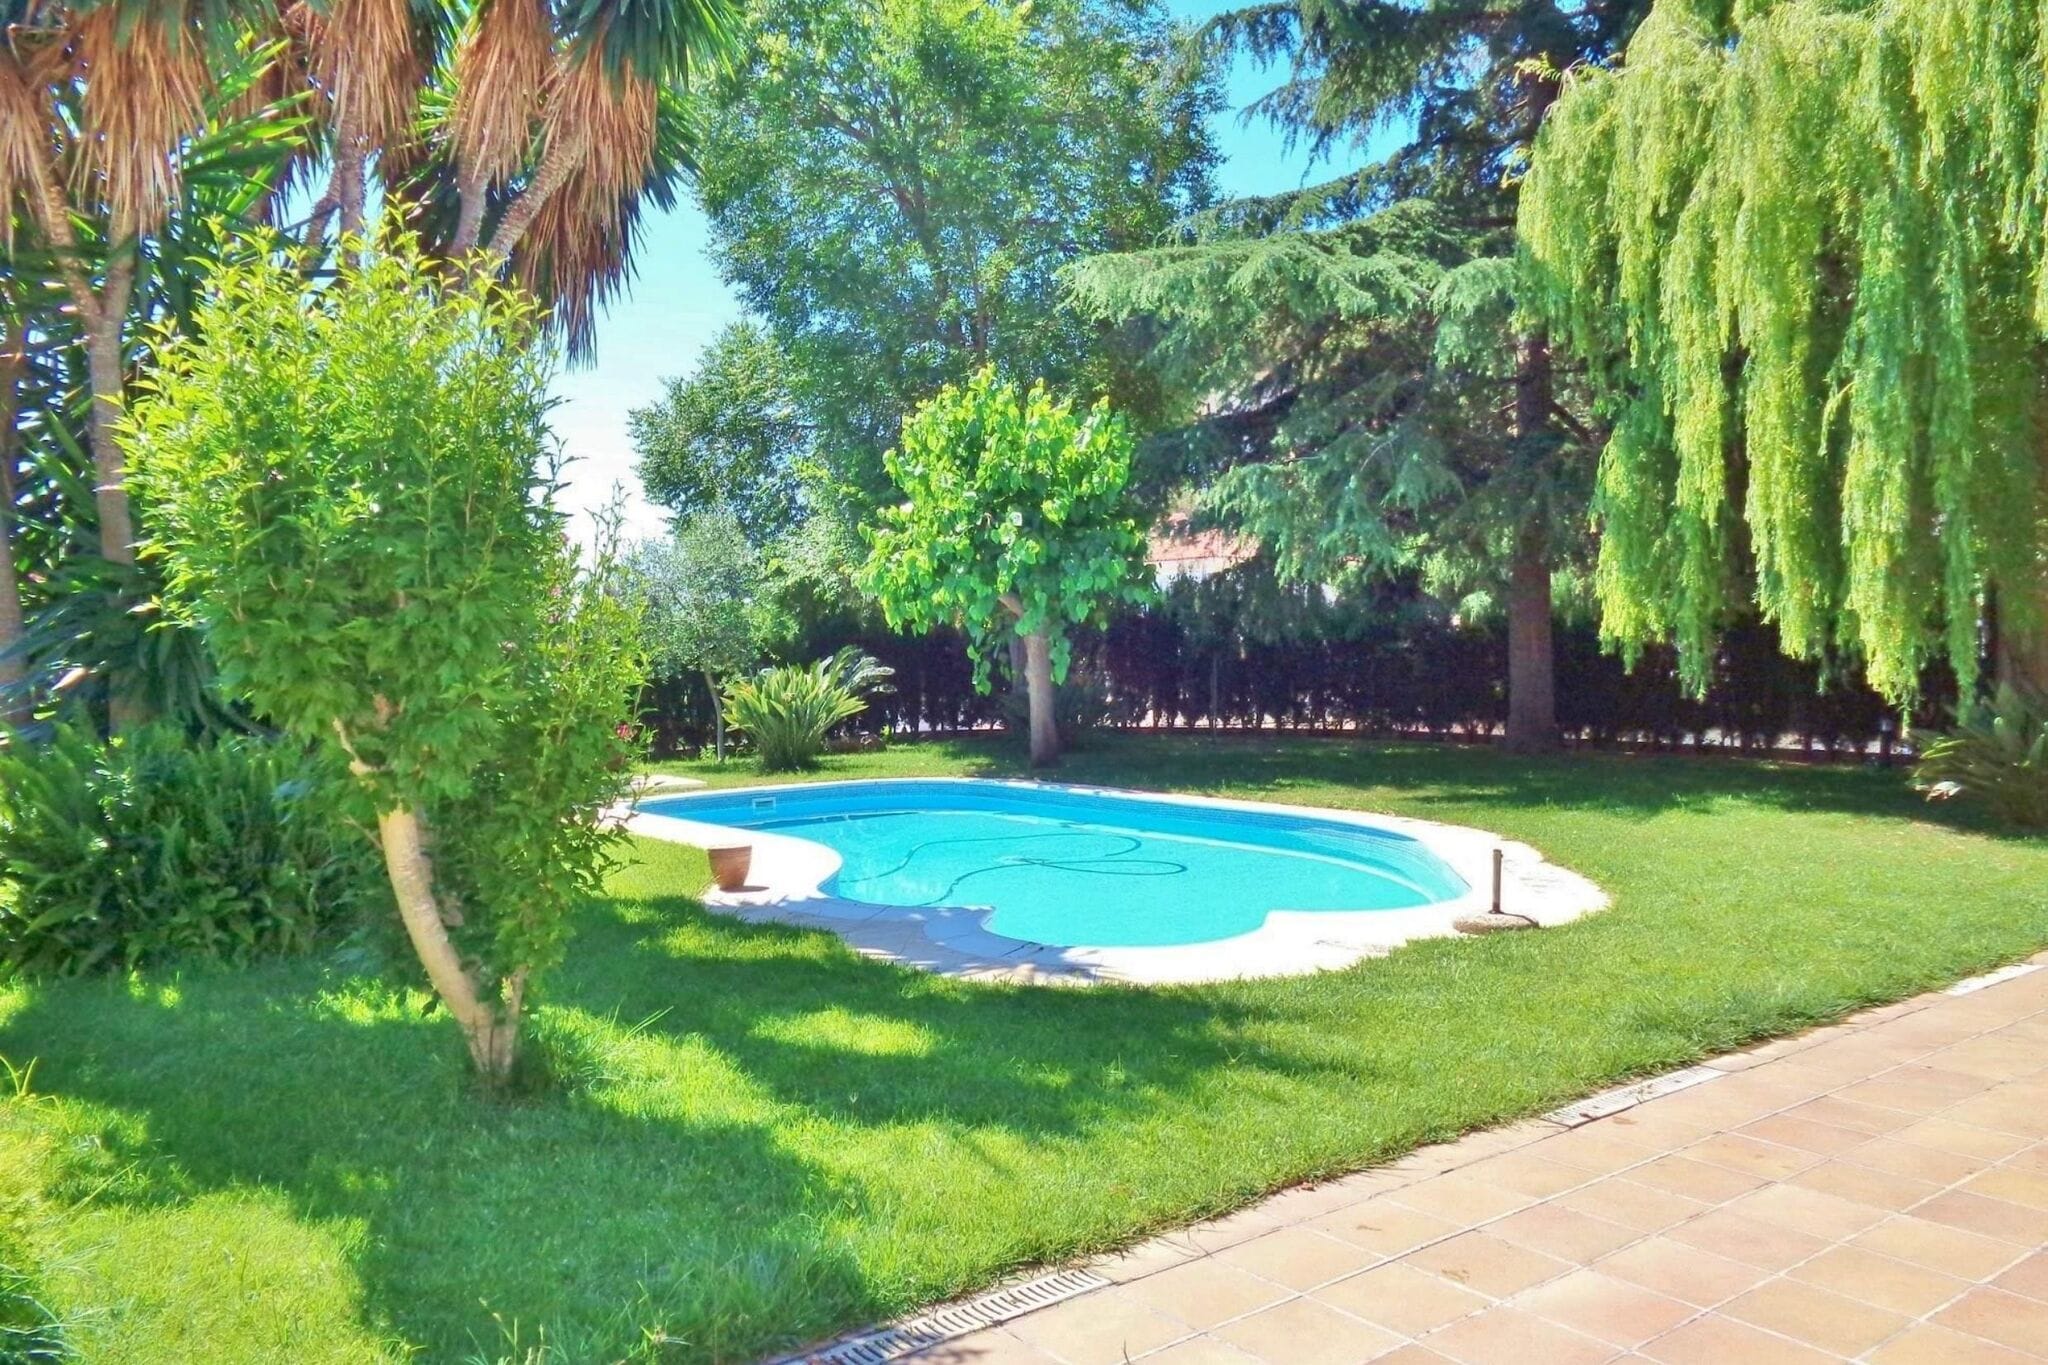 Authentic holiday villa in Sant Pol de Mar, just 250 meters from the beach